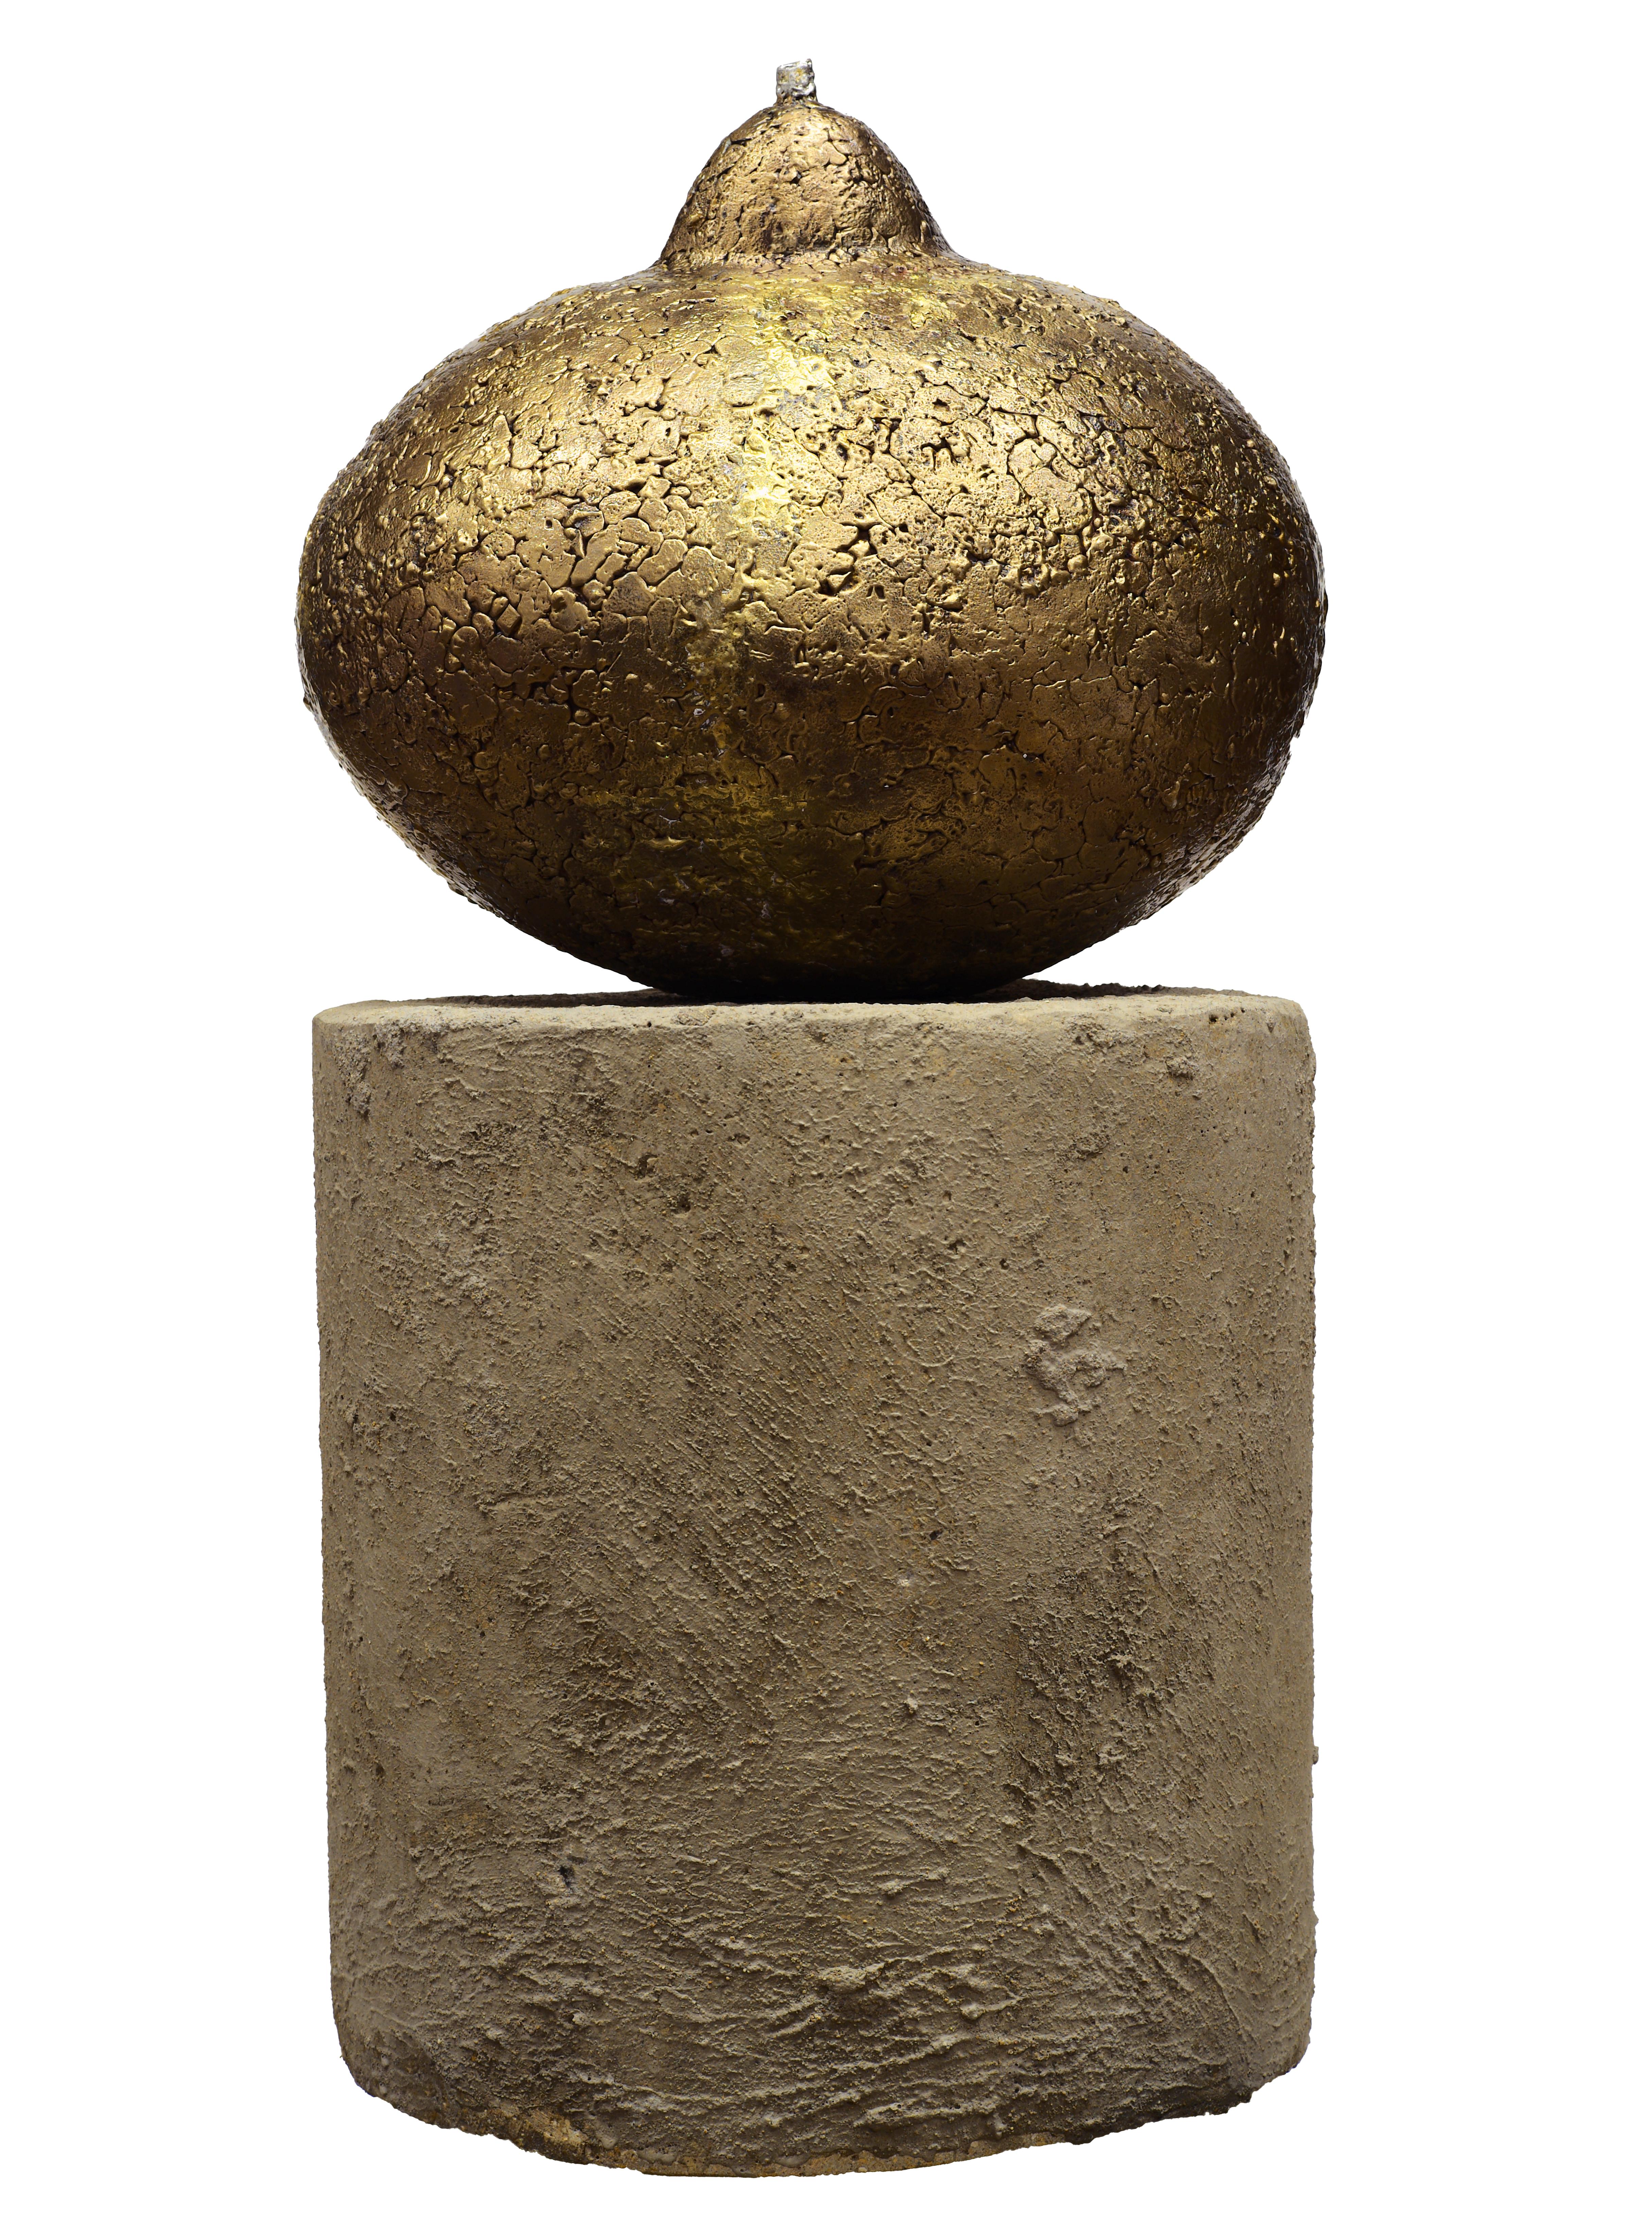 An oversized bronze pear sits upon a circular concrete base in Mary Block's unique work entitled Summer Pear. This one of a kind bronze sculpture is perfect in its imperfect shape as only nature can produce. The surface of the bronze is a smoothed